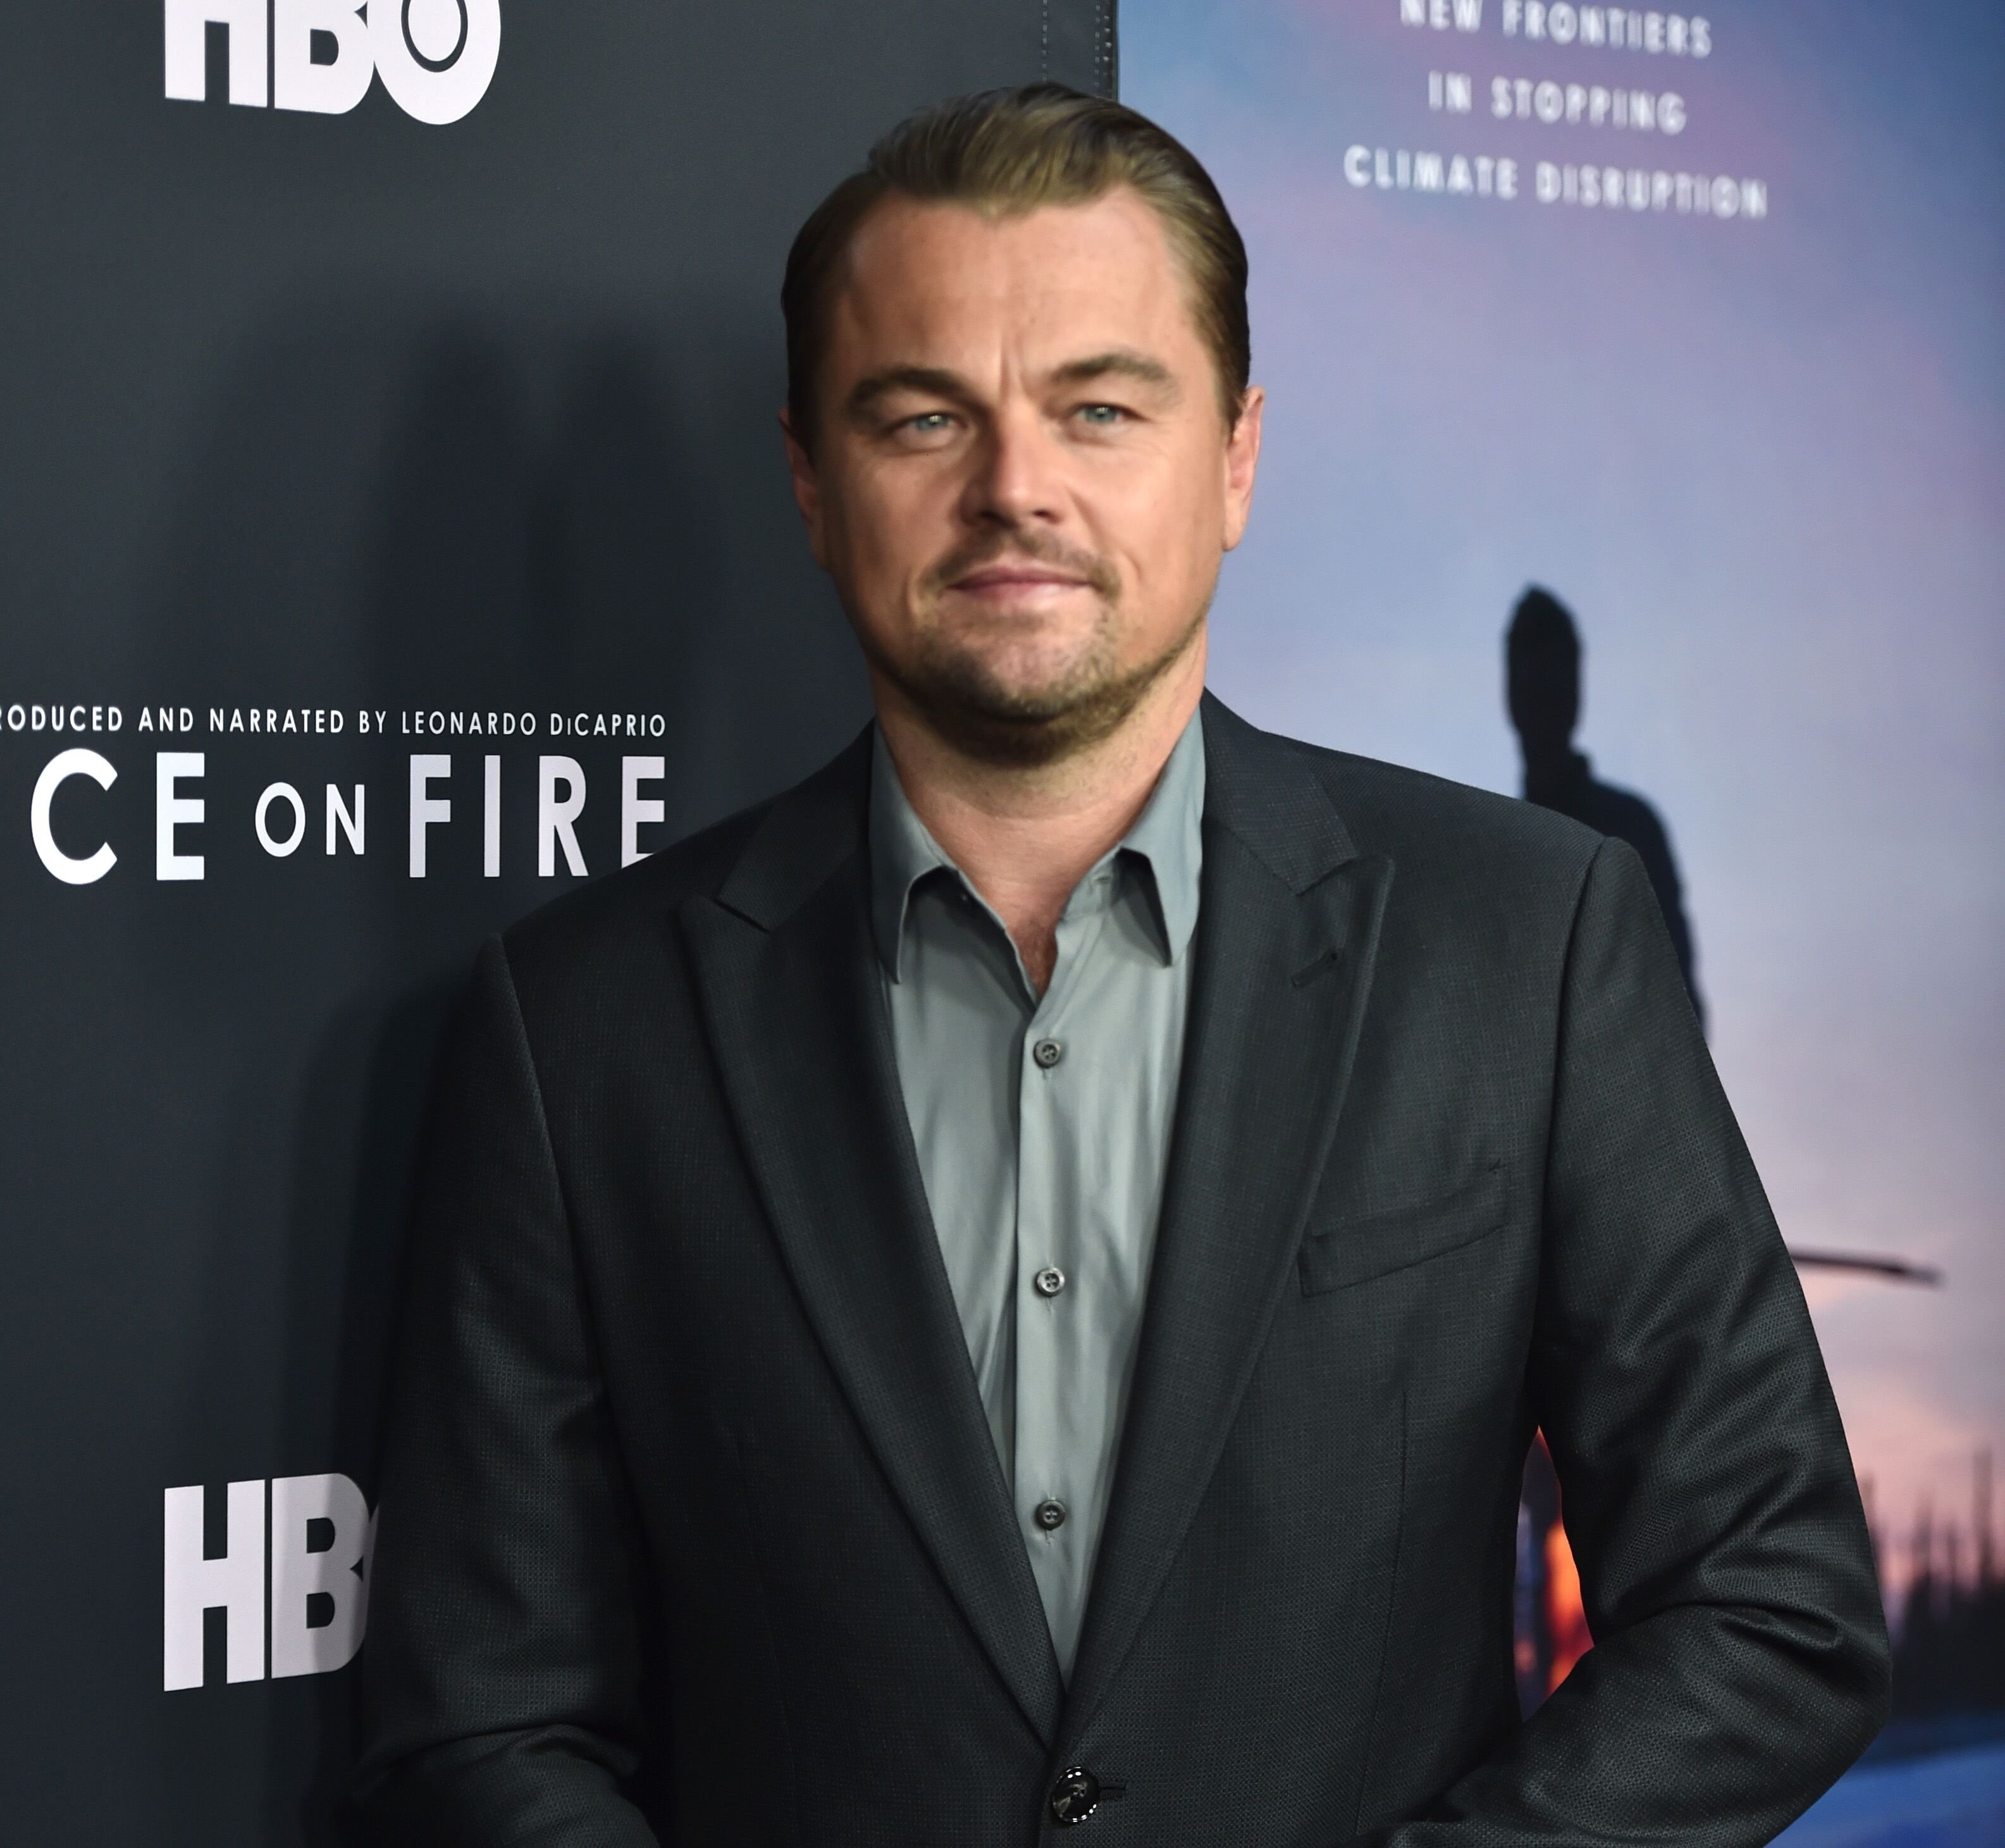 Leonardo DiCaprio attends the L.A. premiere of HBO's "Ice On Fire" at LACMA. | Source: Getty Images